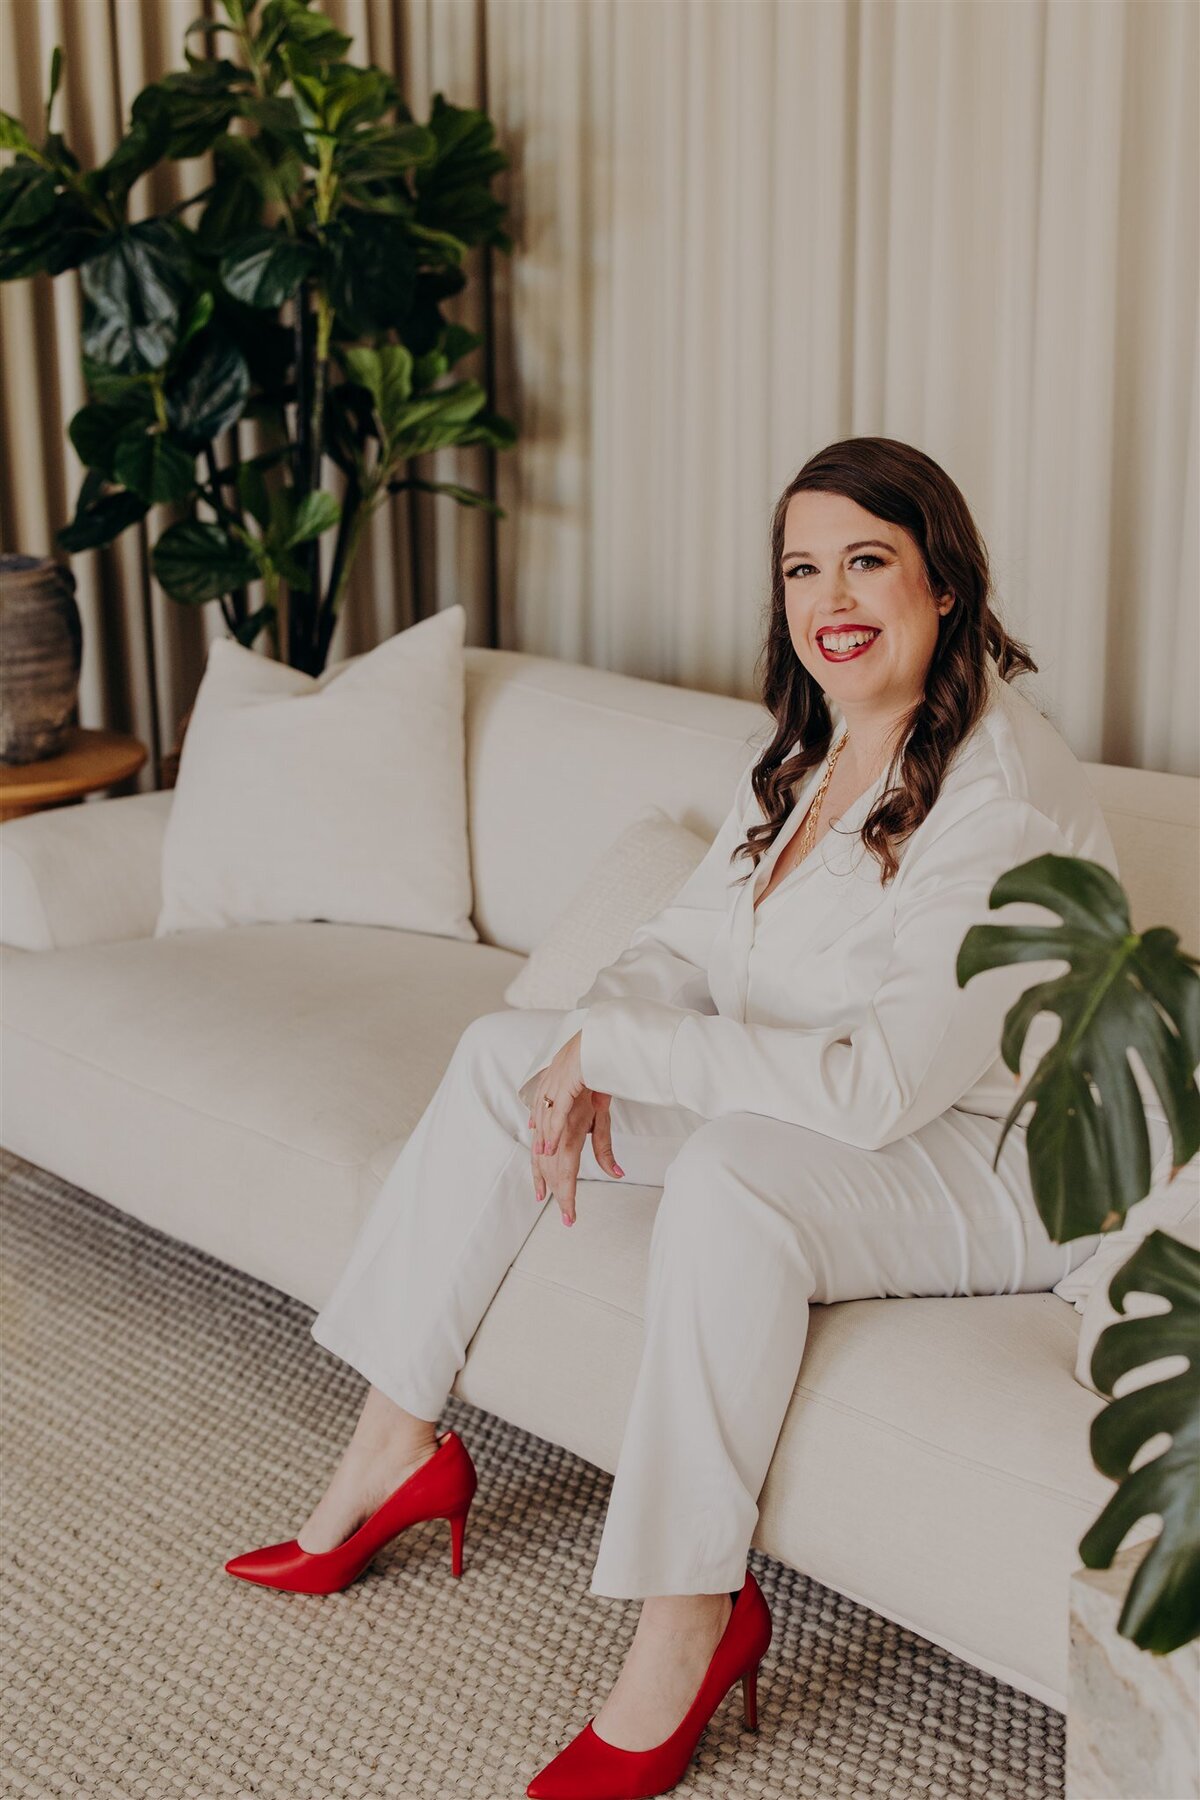 therapist in white suit sitting on couch with hands folded and smiling